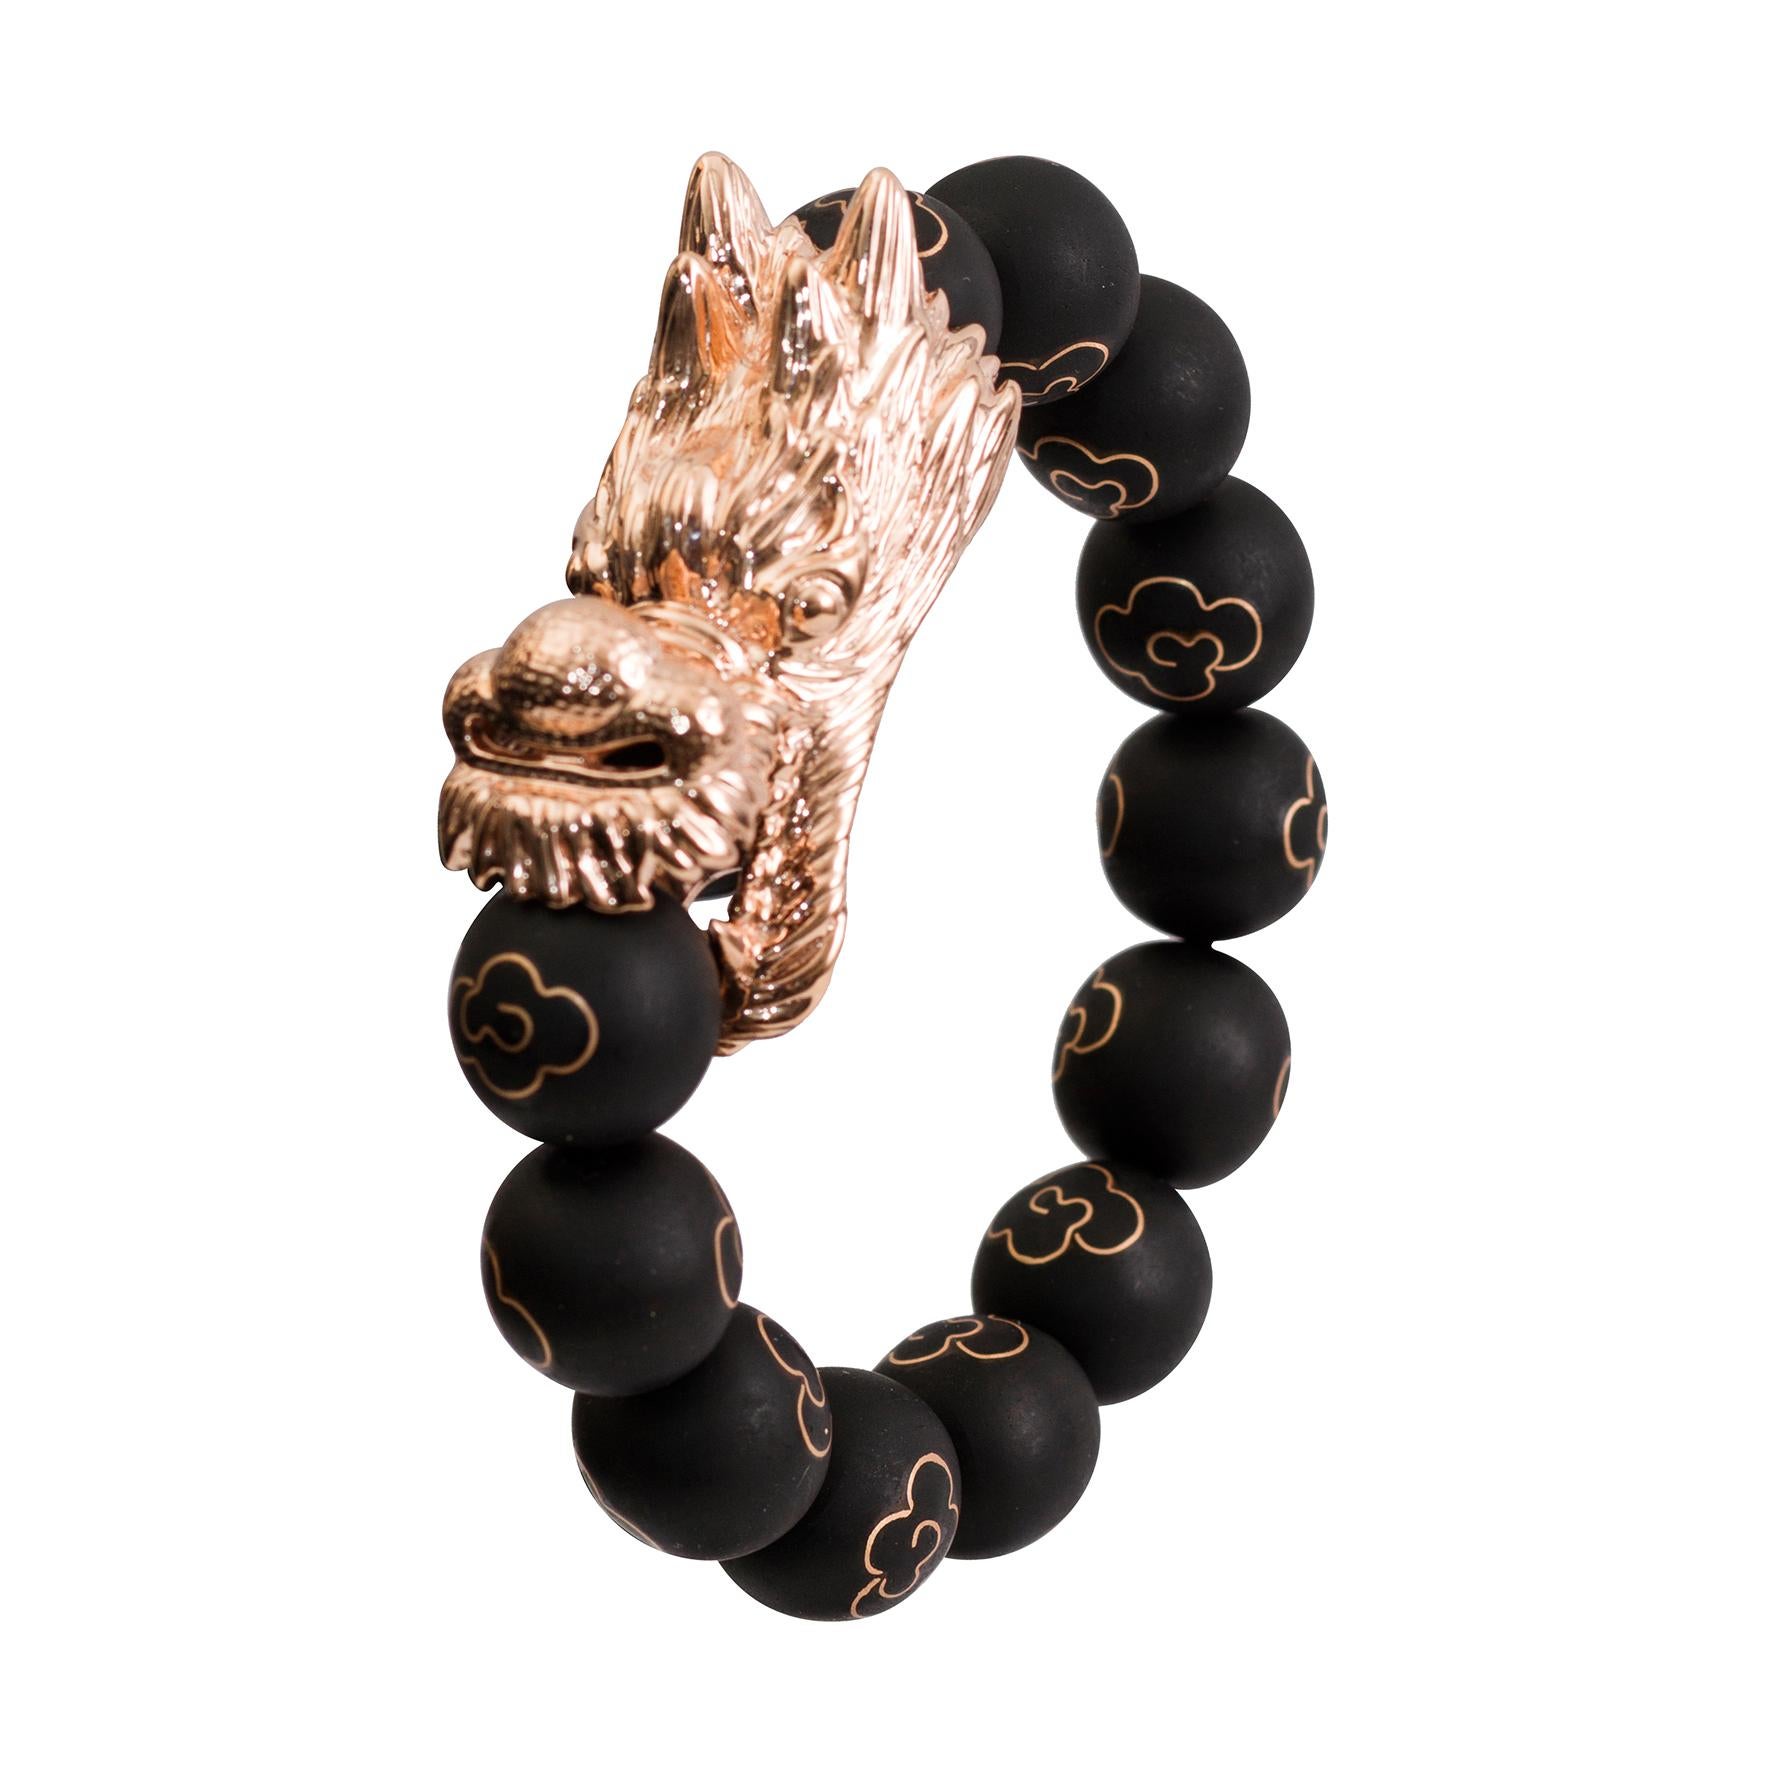 9K gold Inlaid Ebony balls bracelet with 9K gold plated silver dragon head. 
wt.63.37g.
It took approximately 8-10 weeks labors to create this piece. 

